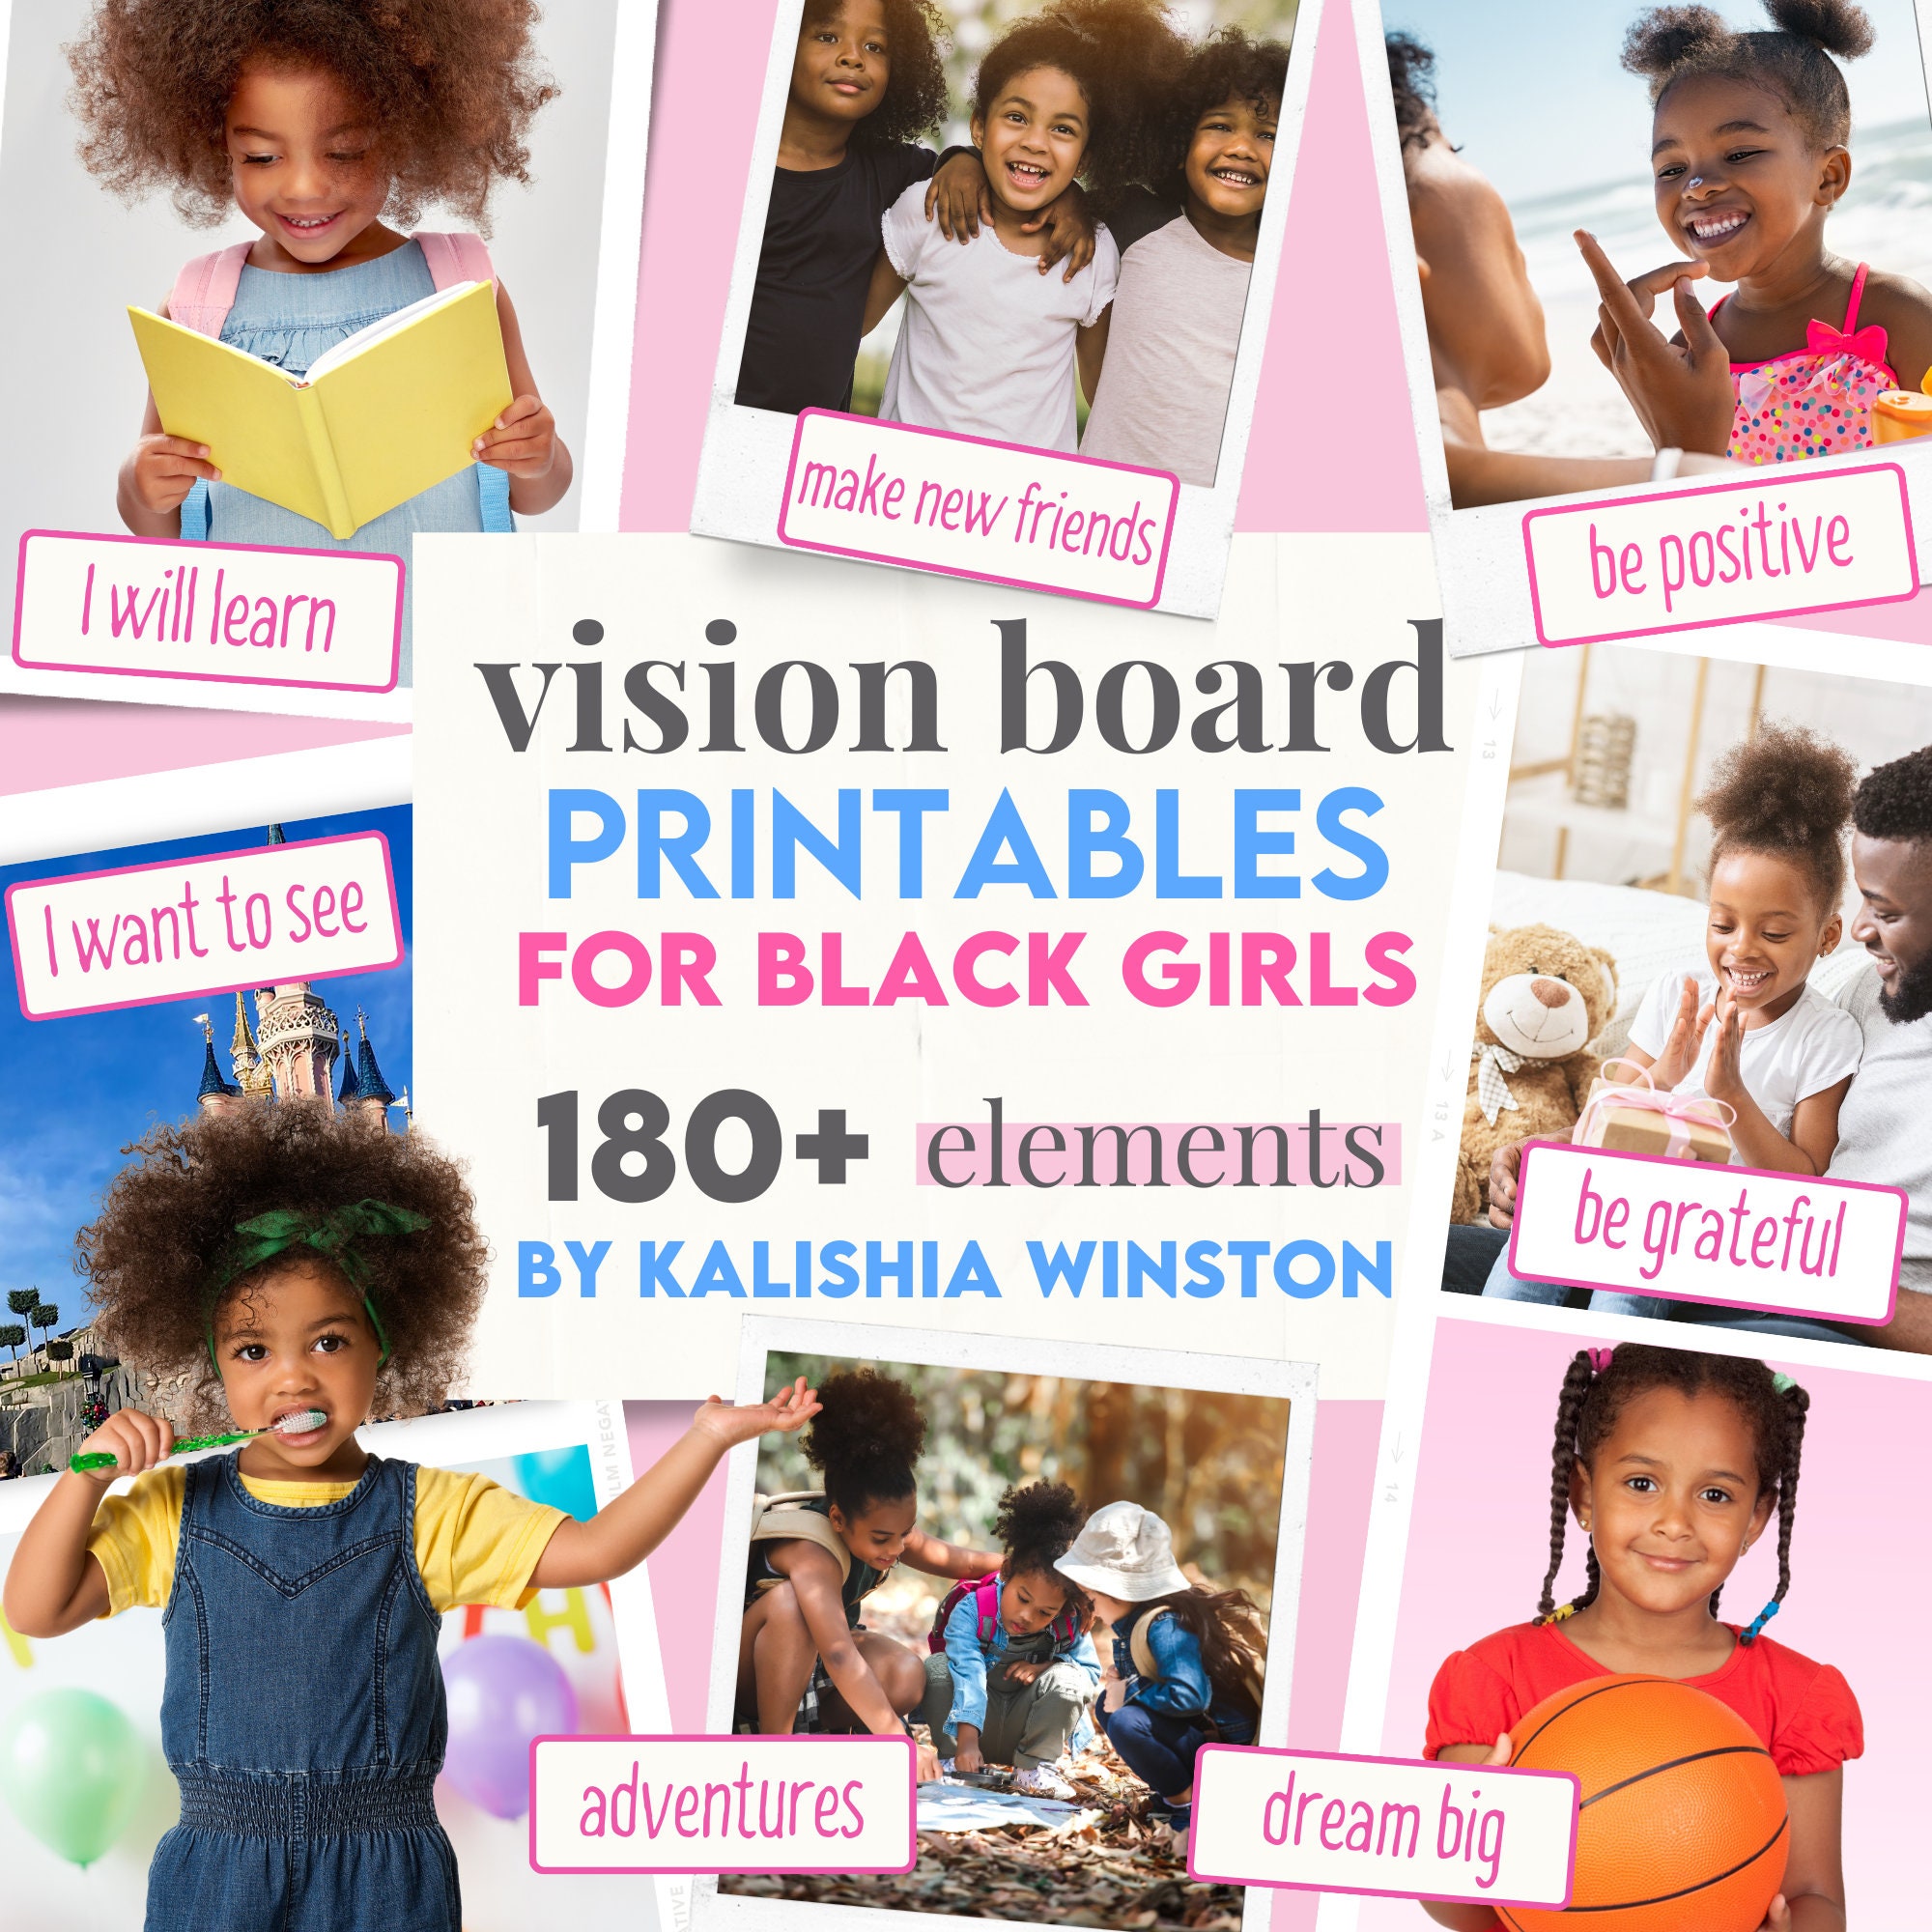 2024 Vision Board Clip Art Book For Hispanic And Latina Women: Design Your  Dream Year with a Beautiful & Inspiring Collection of 500+ Images, Words,   and Latina Women (Vision Board Supplies)